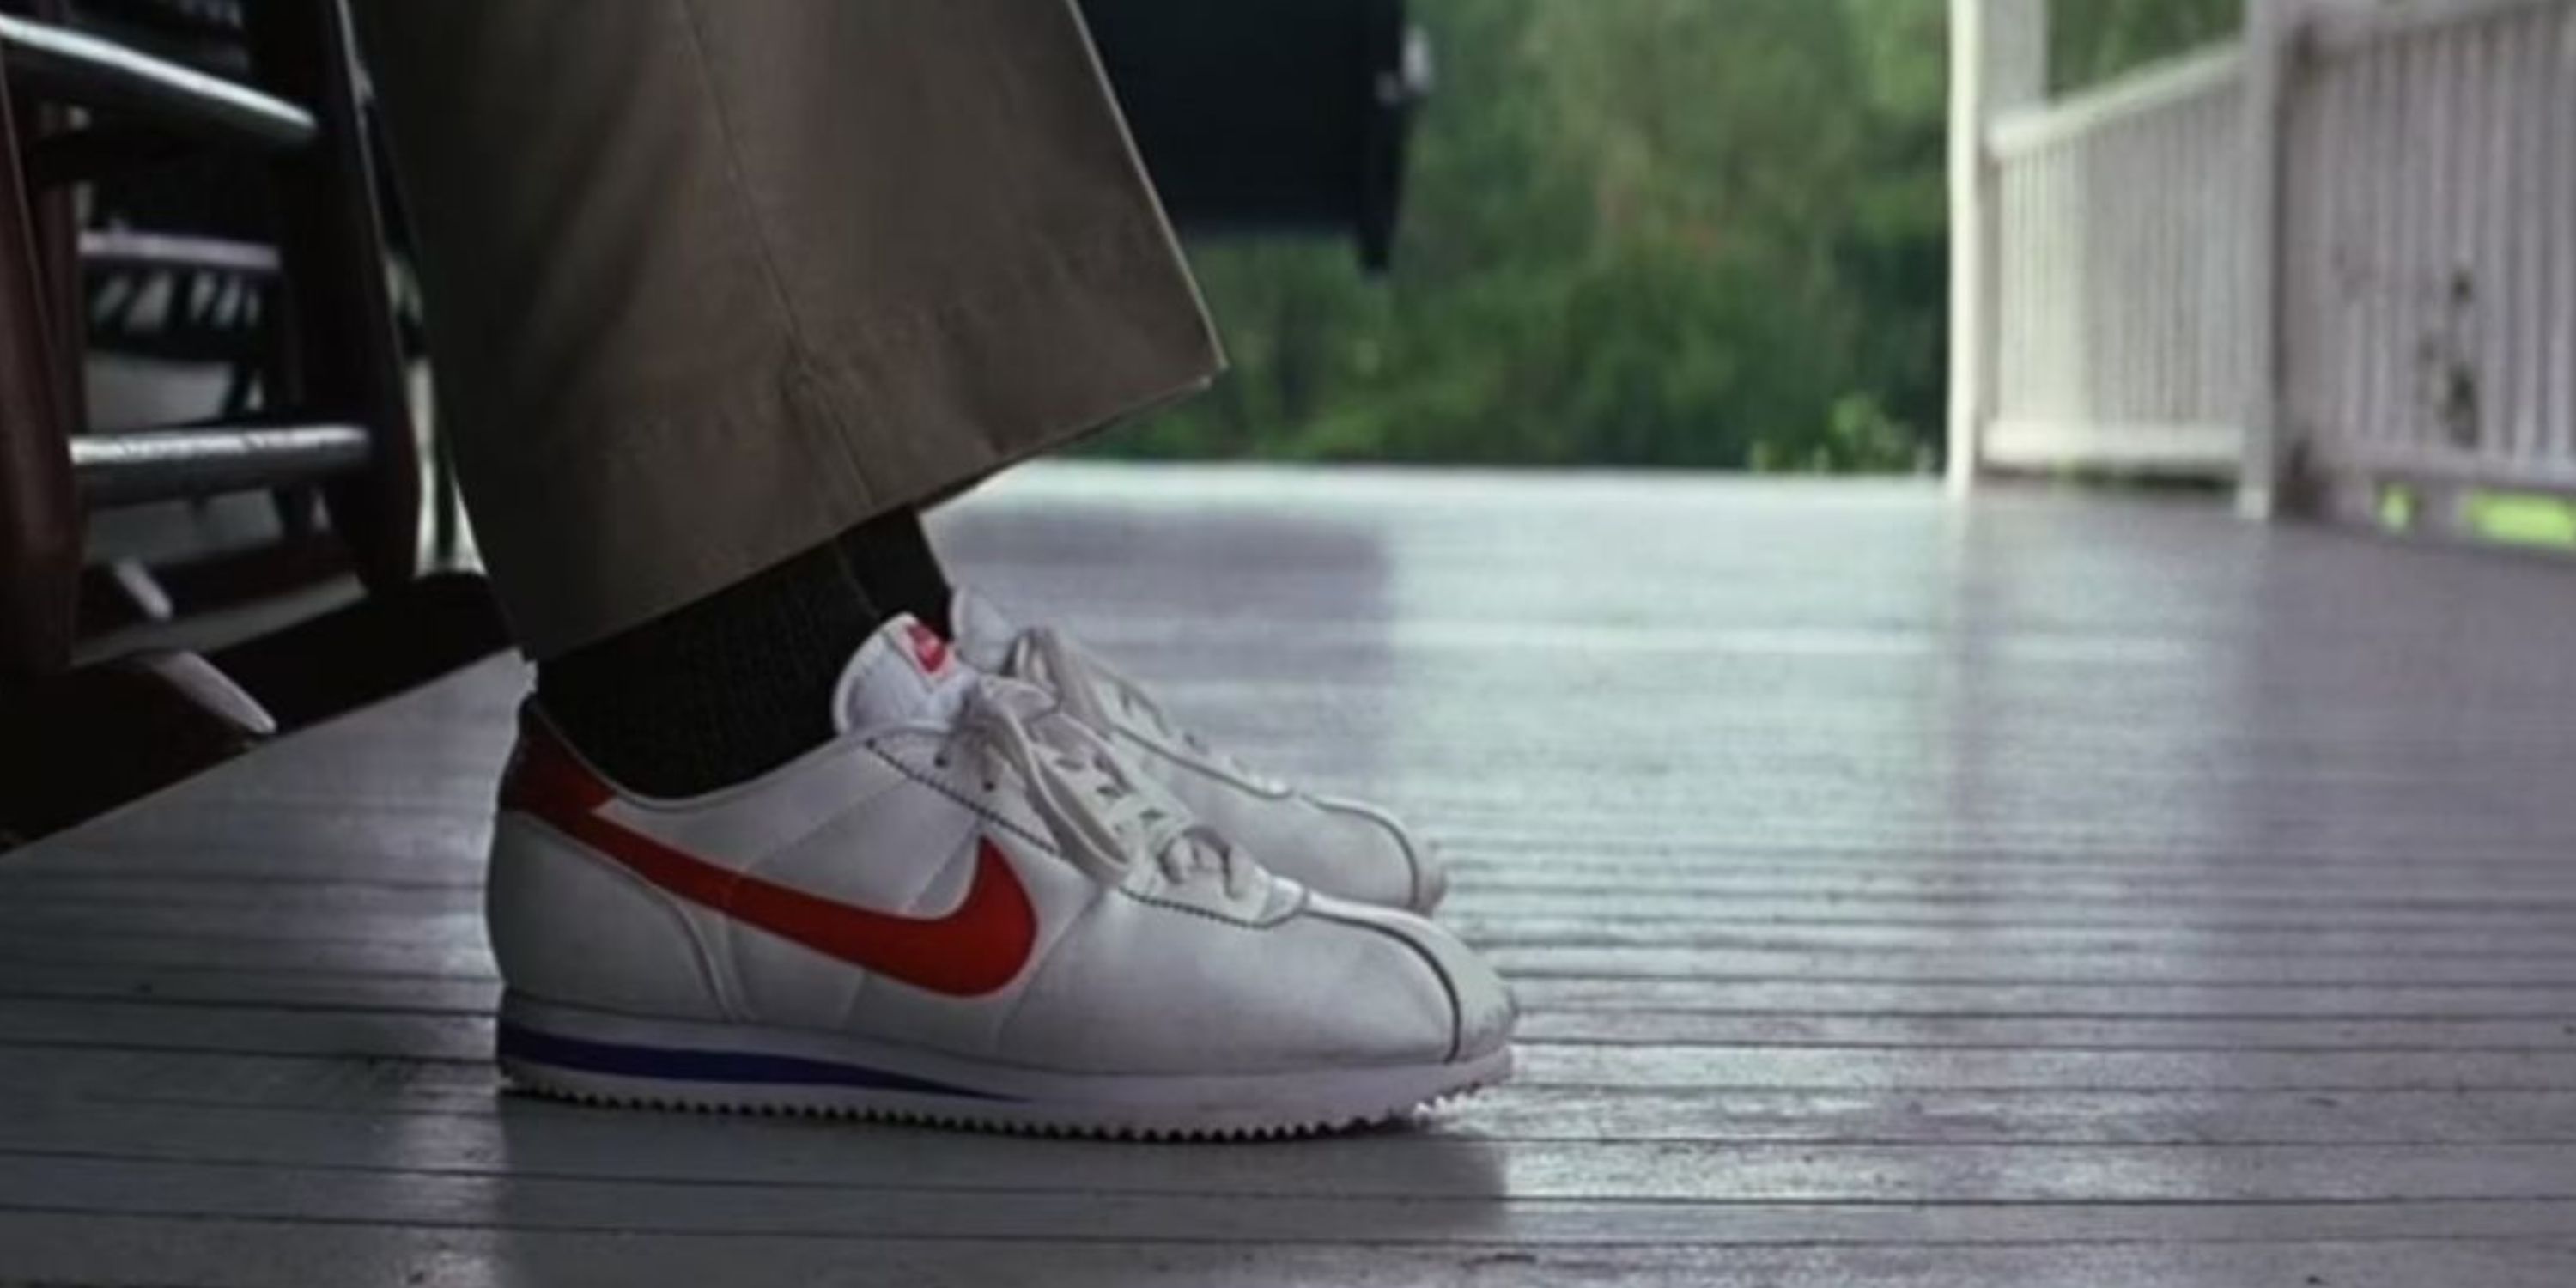 A shot of Forrest's shoes in the 1994 movie Forrest Gump